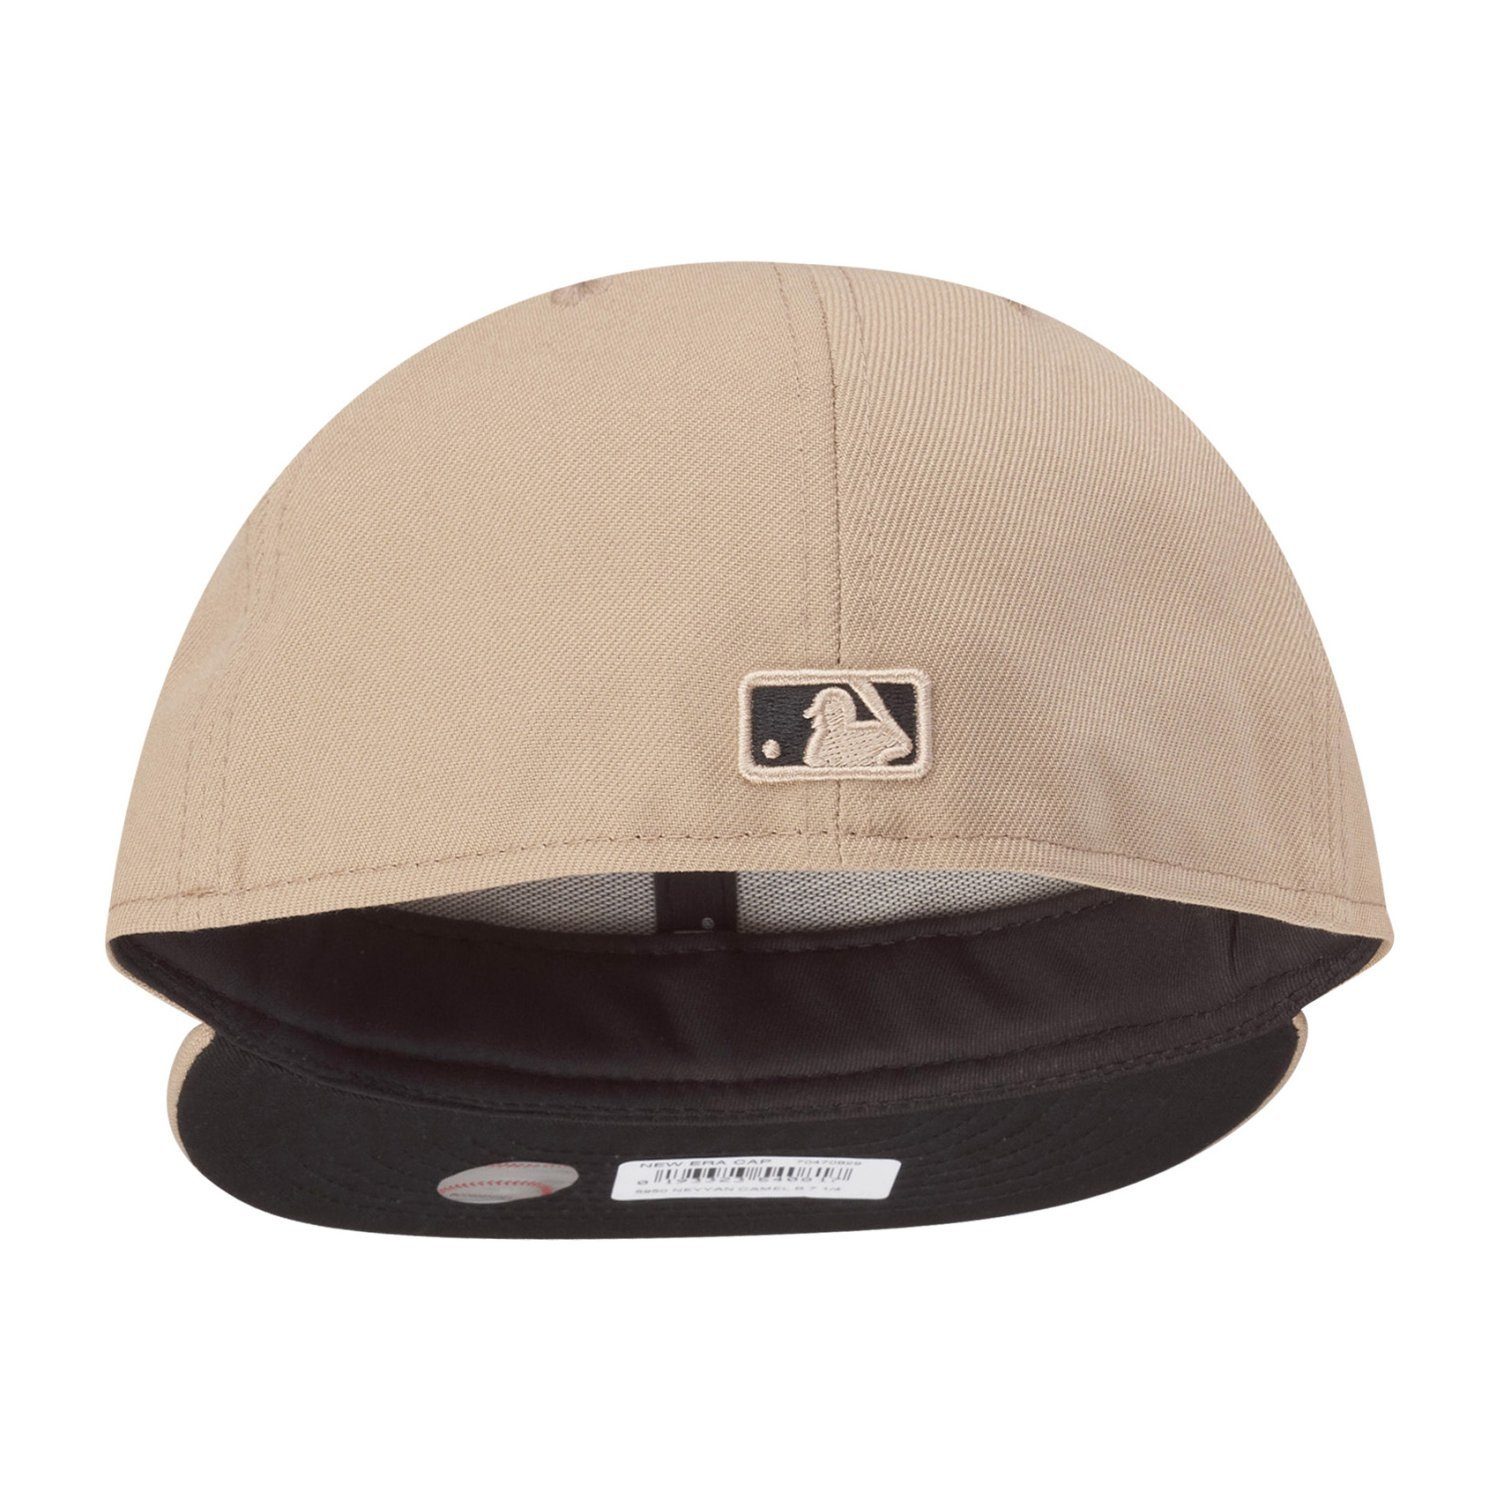 MLB Cap Fitted Era 59Fifty Beige Angeles New Dodgers Los